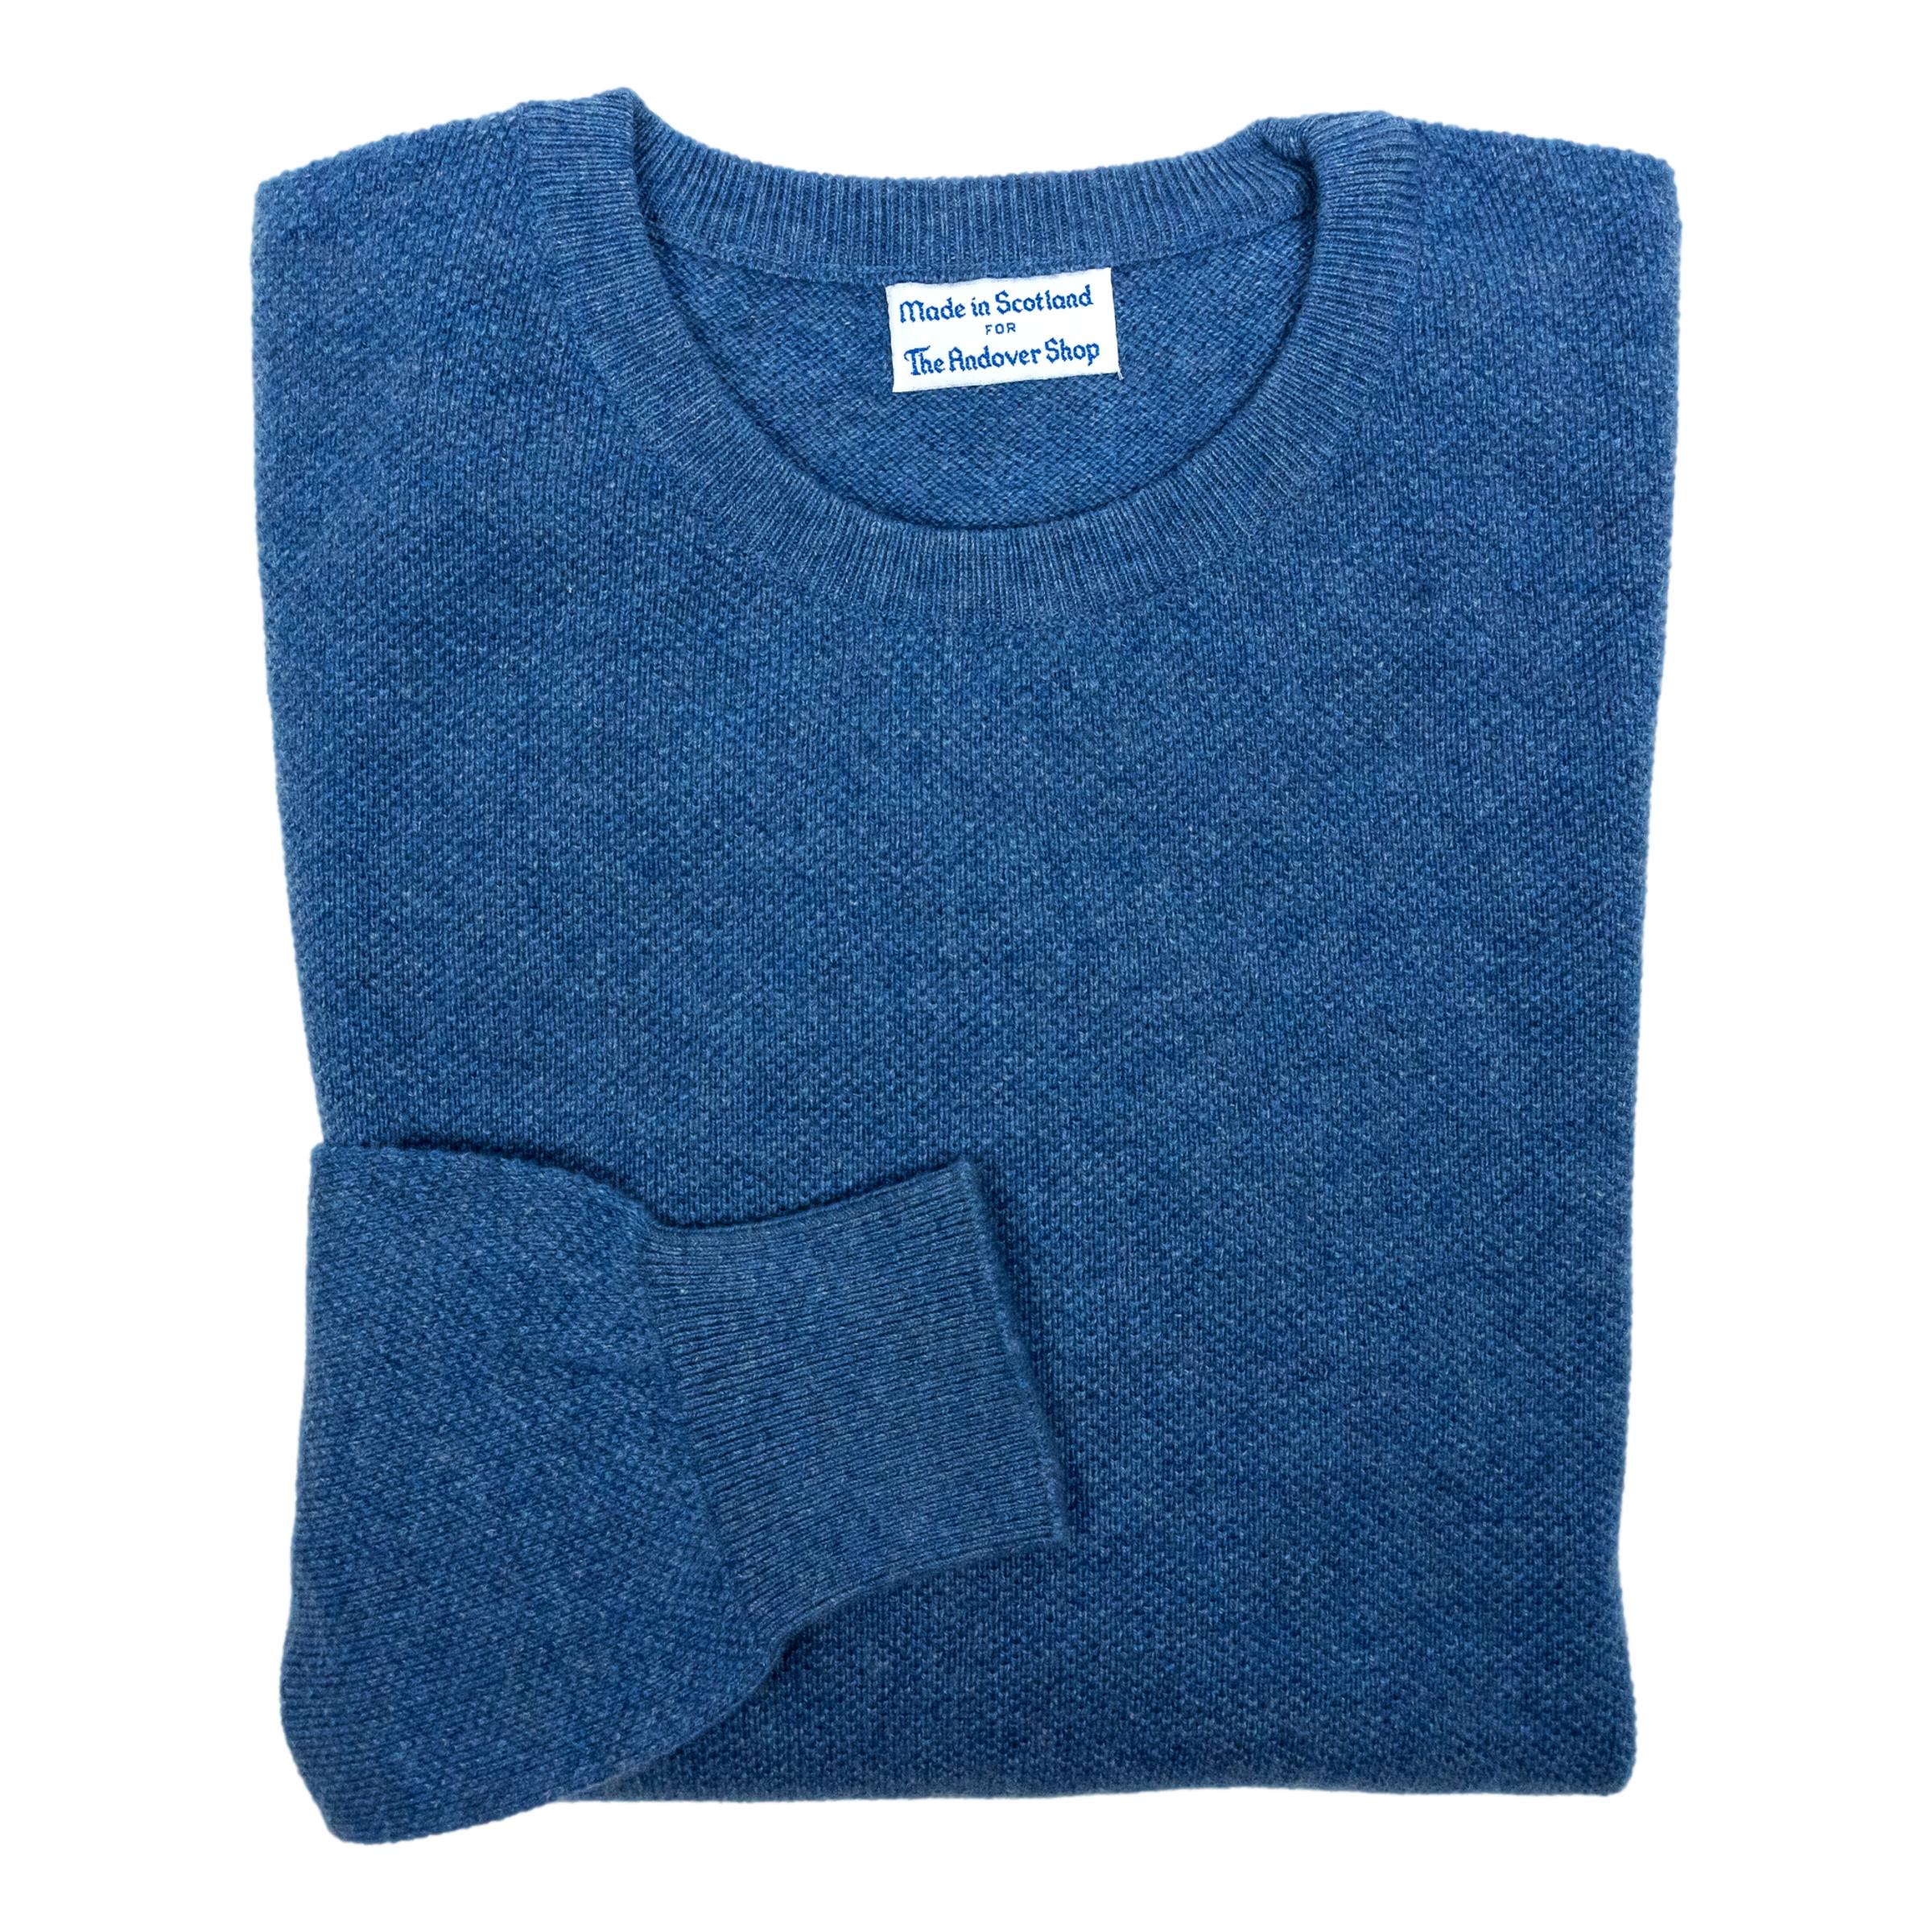 Pure Cashmere Waffle Knit Crew Neck Sweater